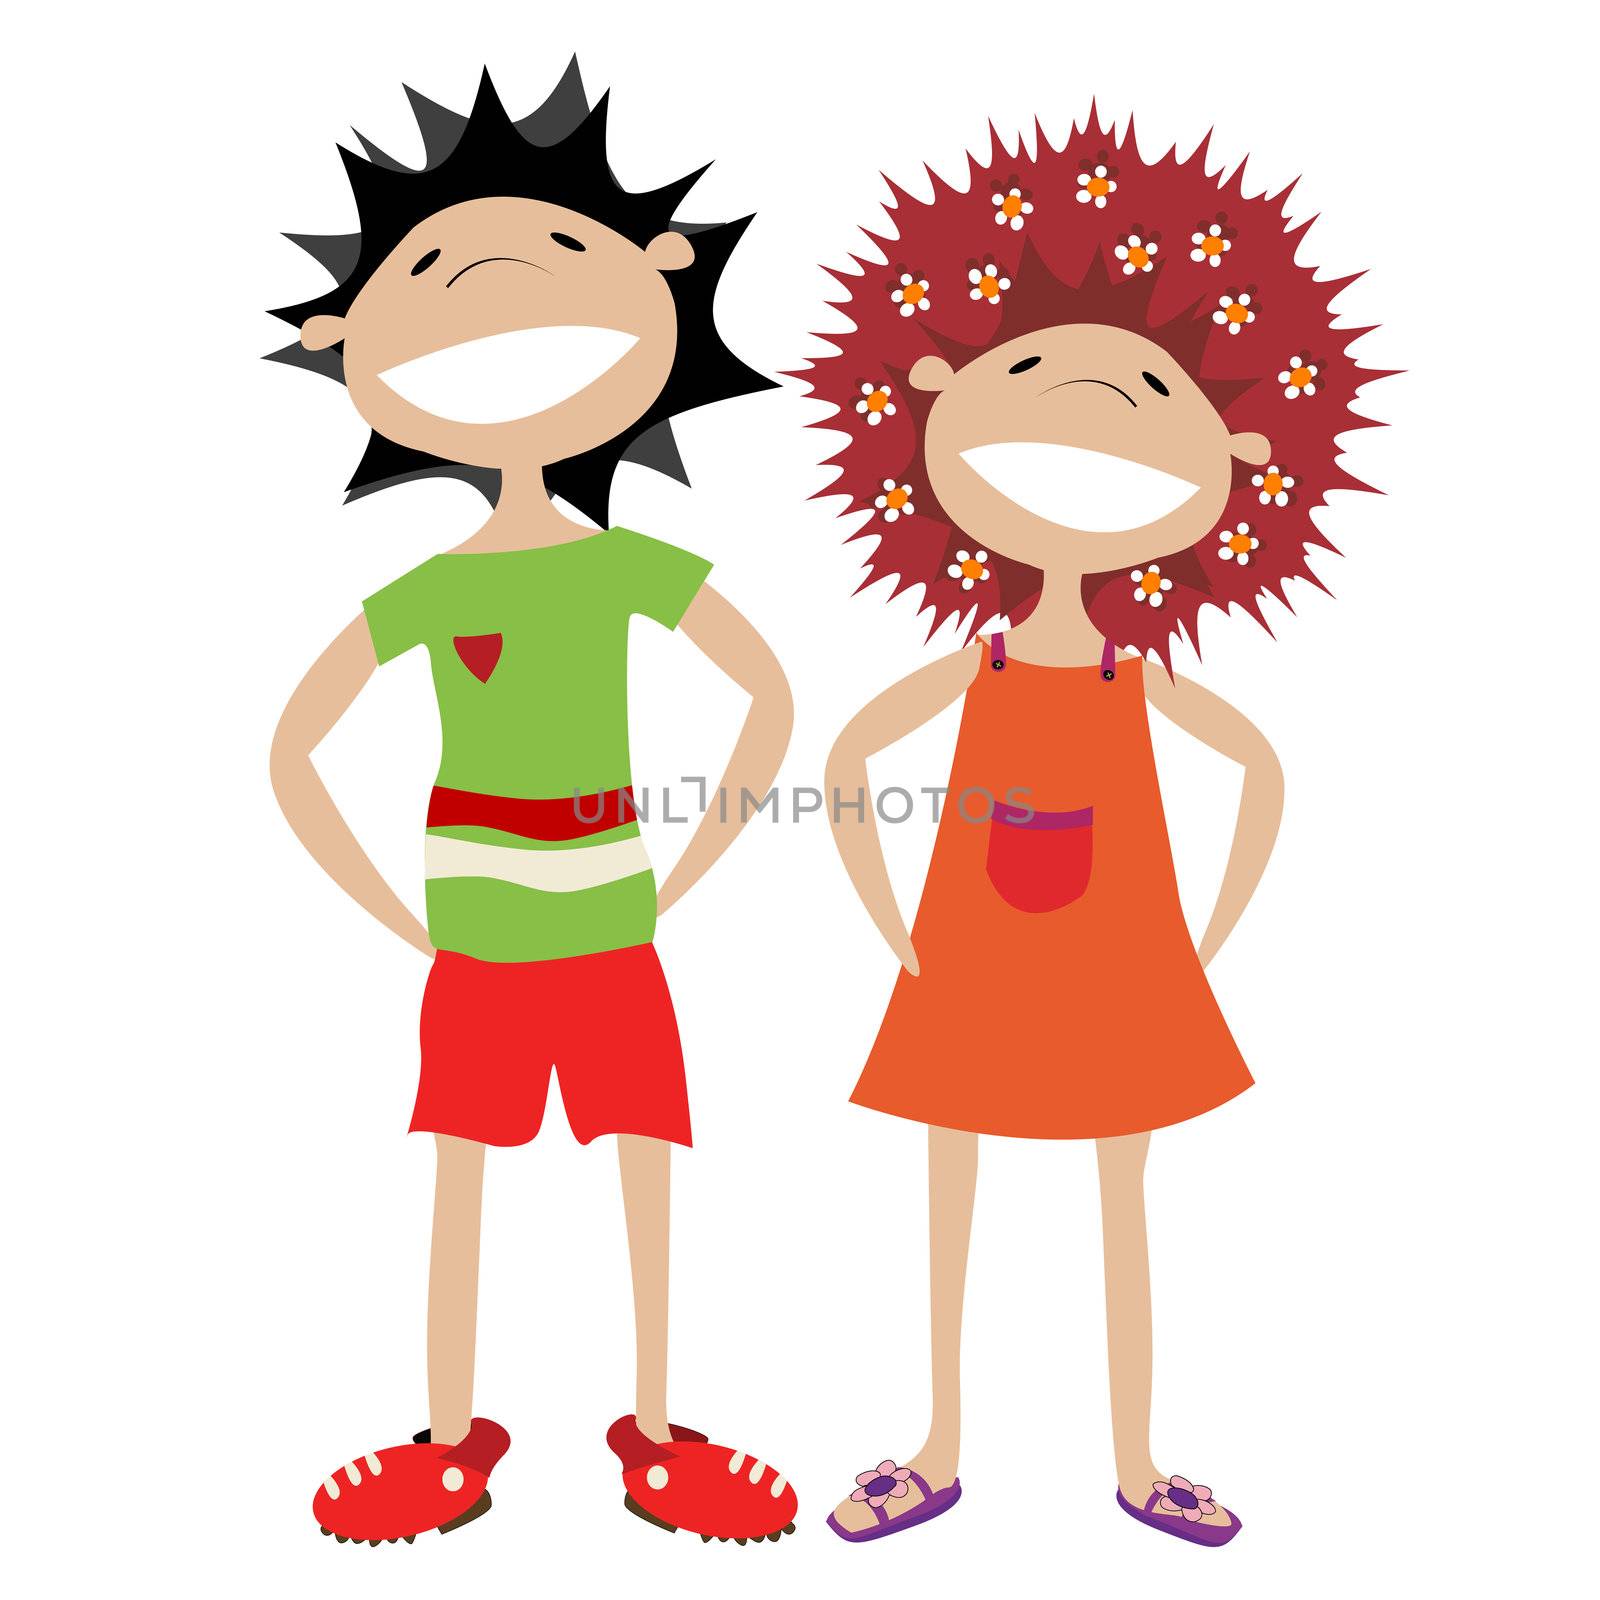 Happy, smilling couple, stylized characters over white background